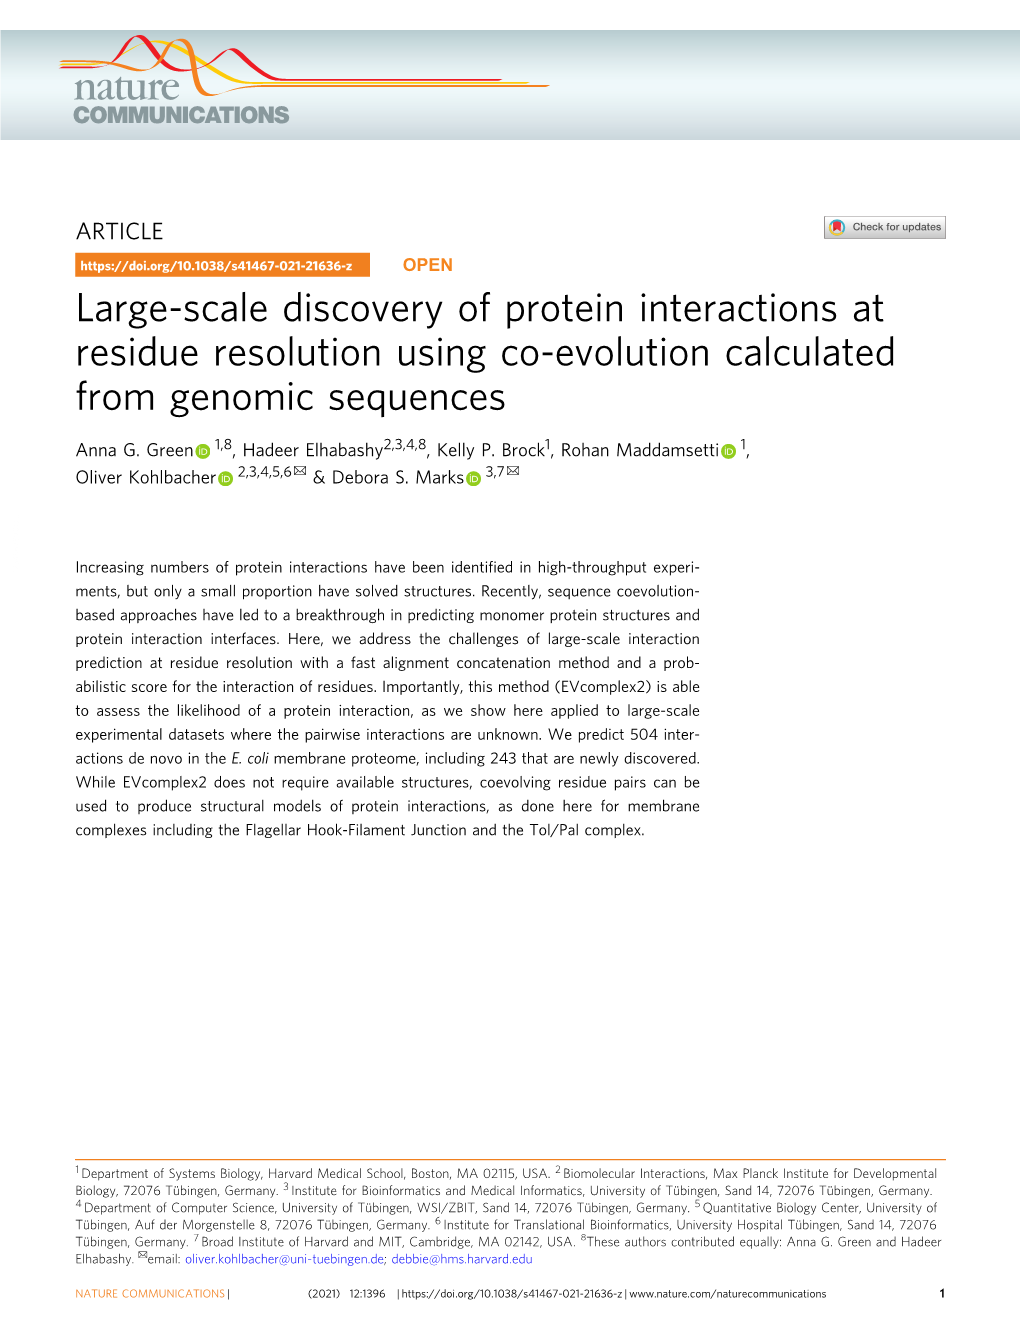 Large-Scale Discovery of Protein Interactions at Residue Resolution Using Co-Evolution Calculated from Genomic Sequences